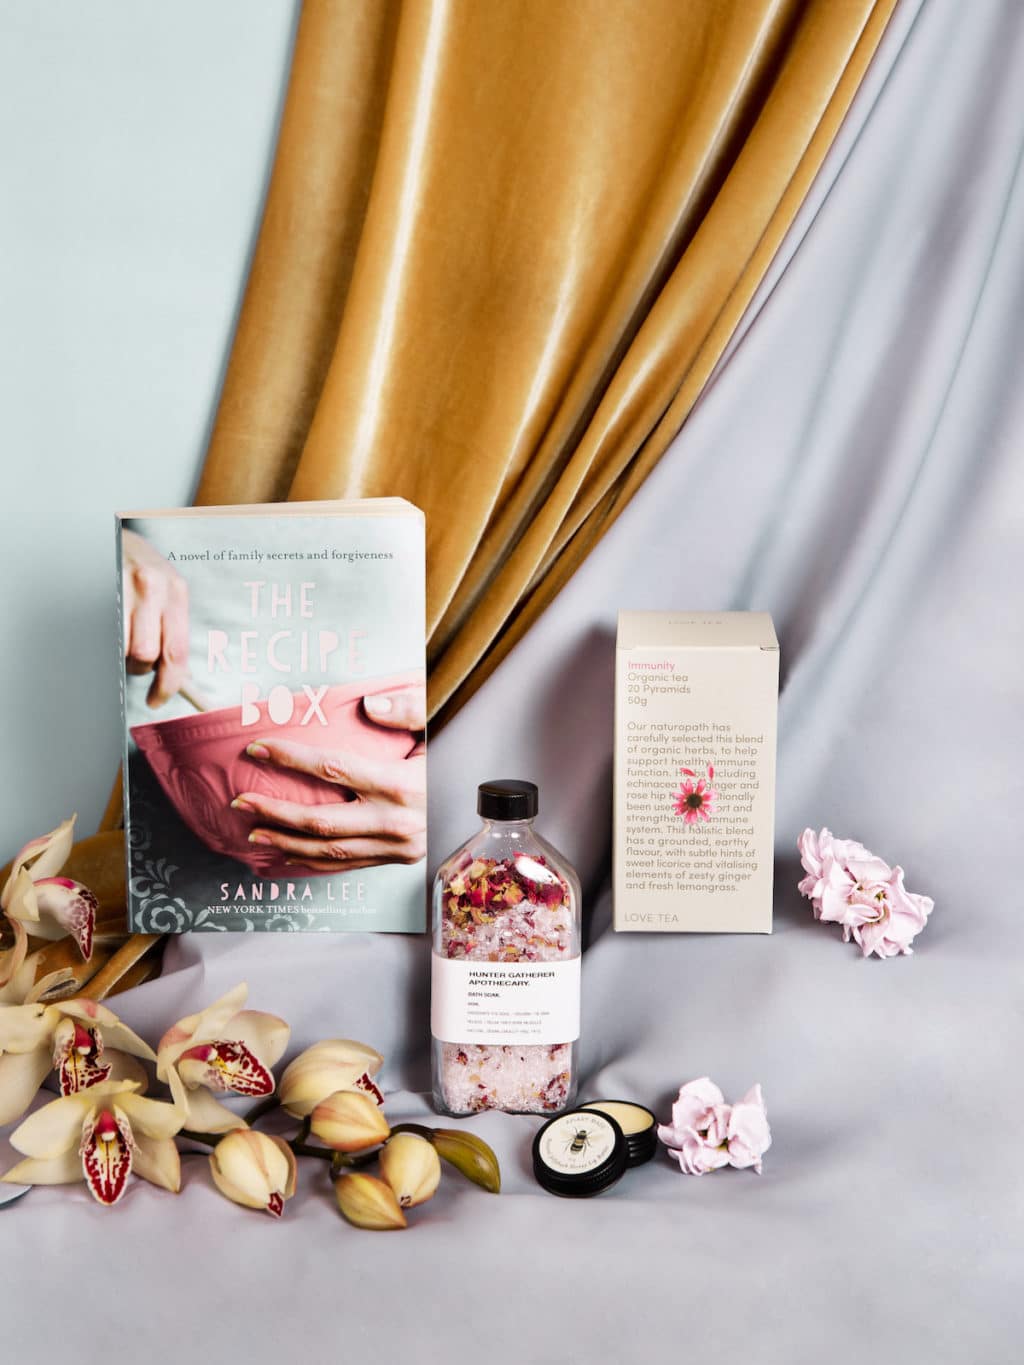 A book, tea, bath soak and lip balm from our hamper, available to add to a fresh flower delivery from our wagga Wagga florist shop.